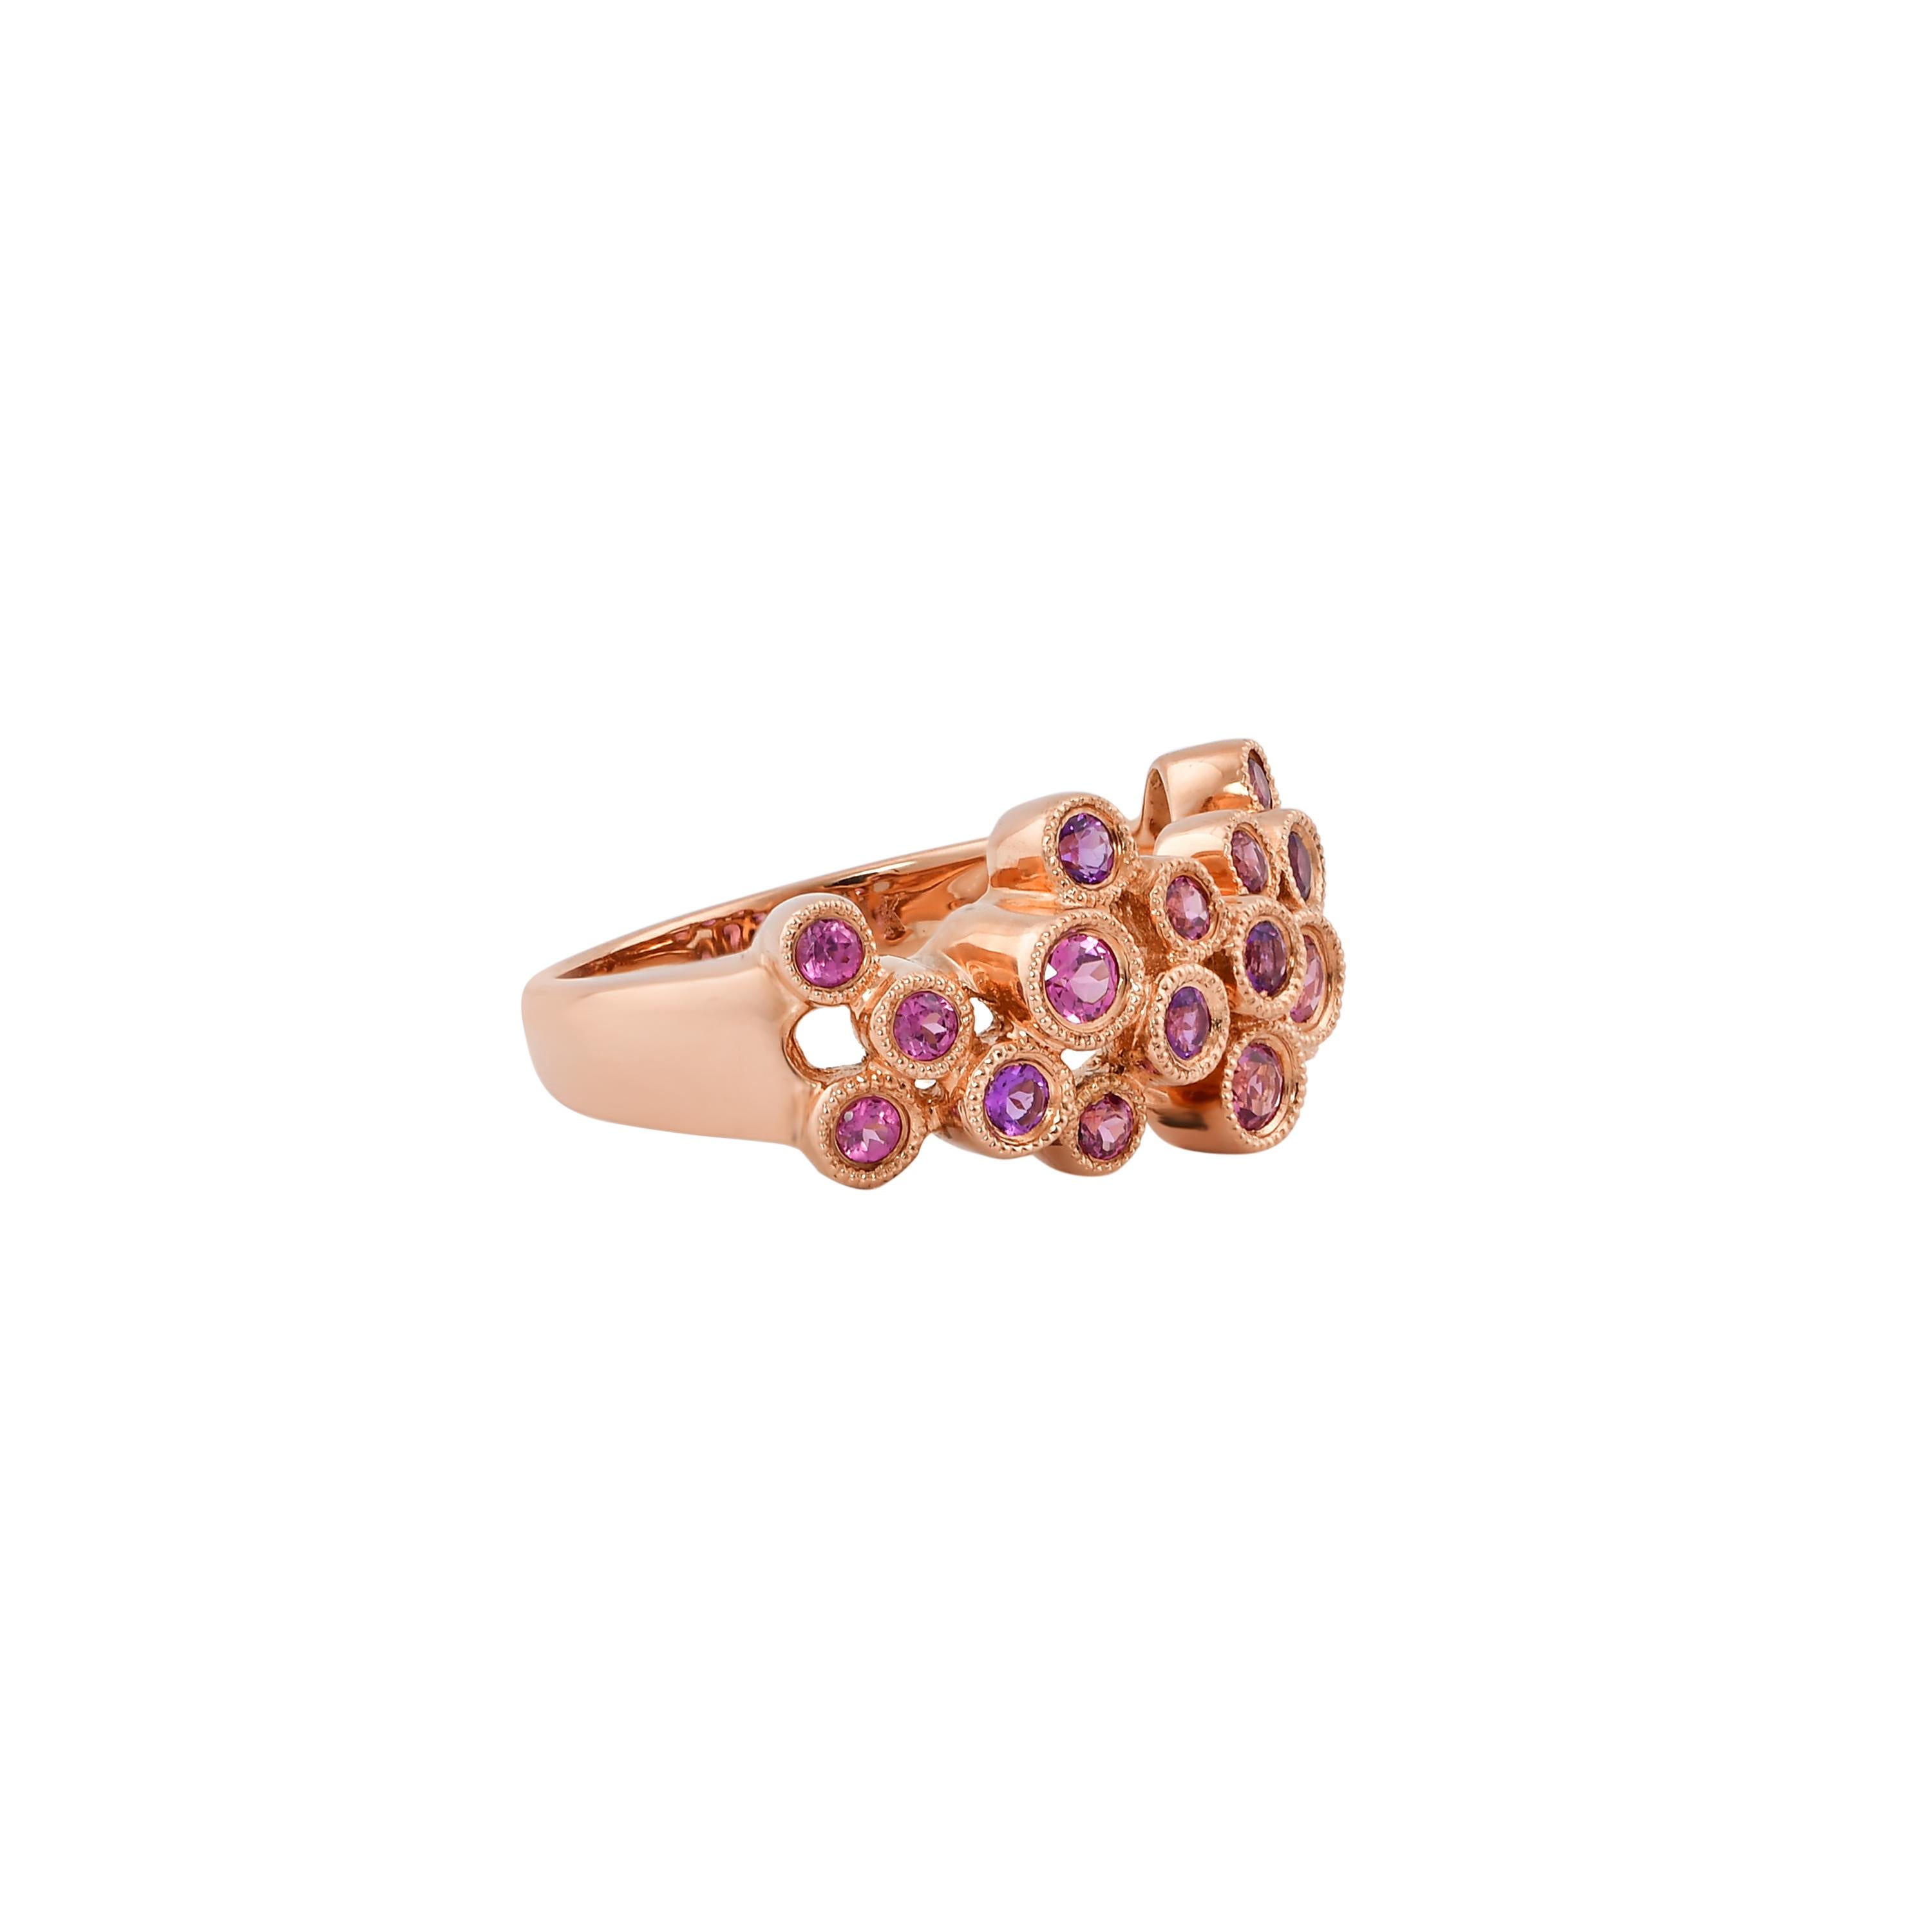 Bezel Cluster Collection featuring dainty gemstones which are bezel set with milgrain detailing. This is a unique presentation of gemstones and is a perfect accessory to add some simple sparkle to your everyday look. 

Fancy amethyst and rhodolite